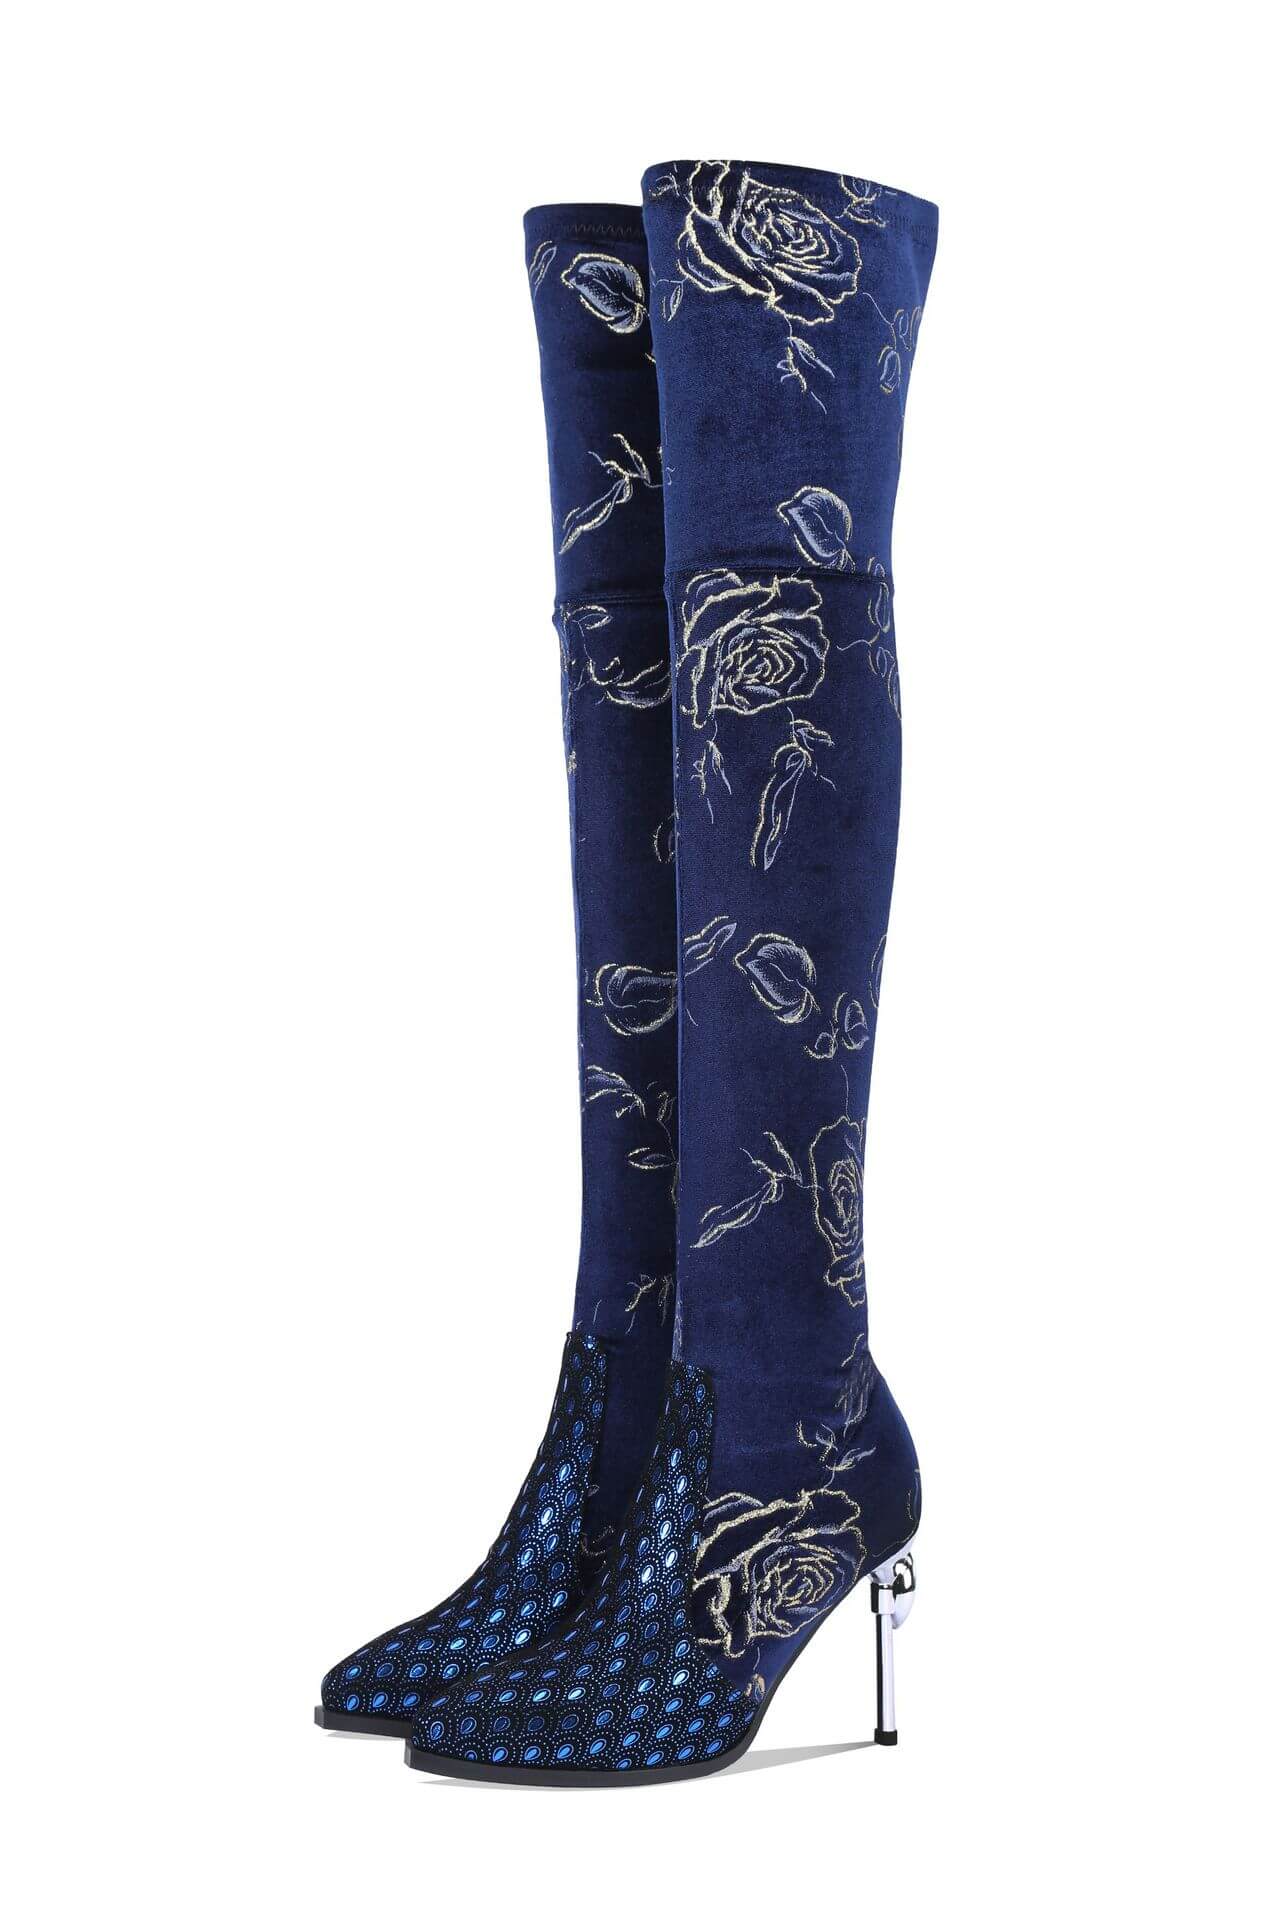 Suede Embroidery Pointed Toe High Heel Over Knee Boots